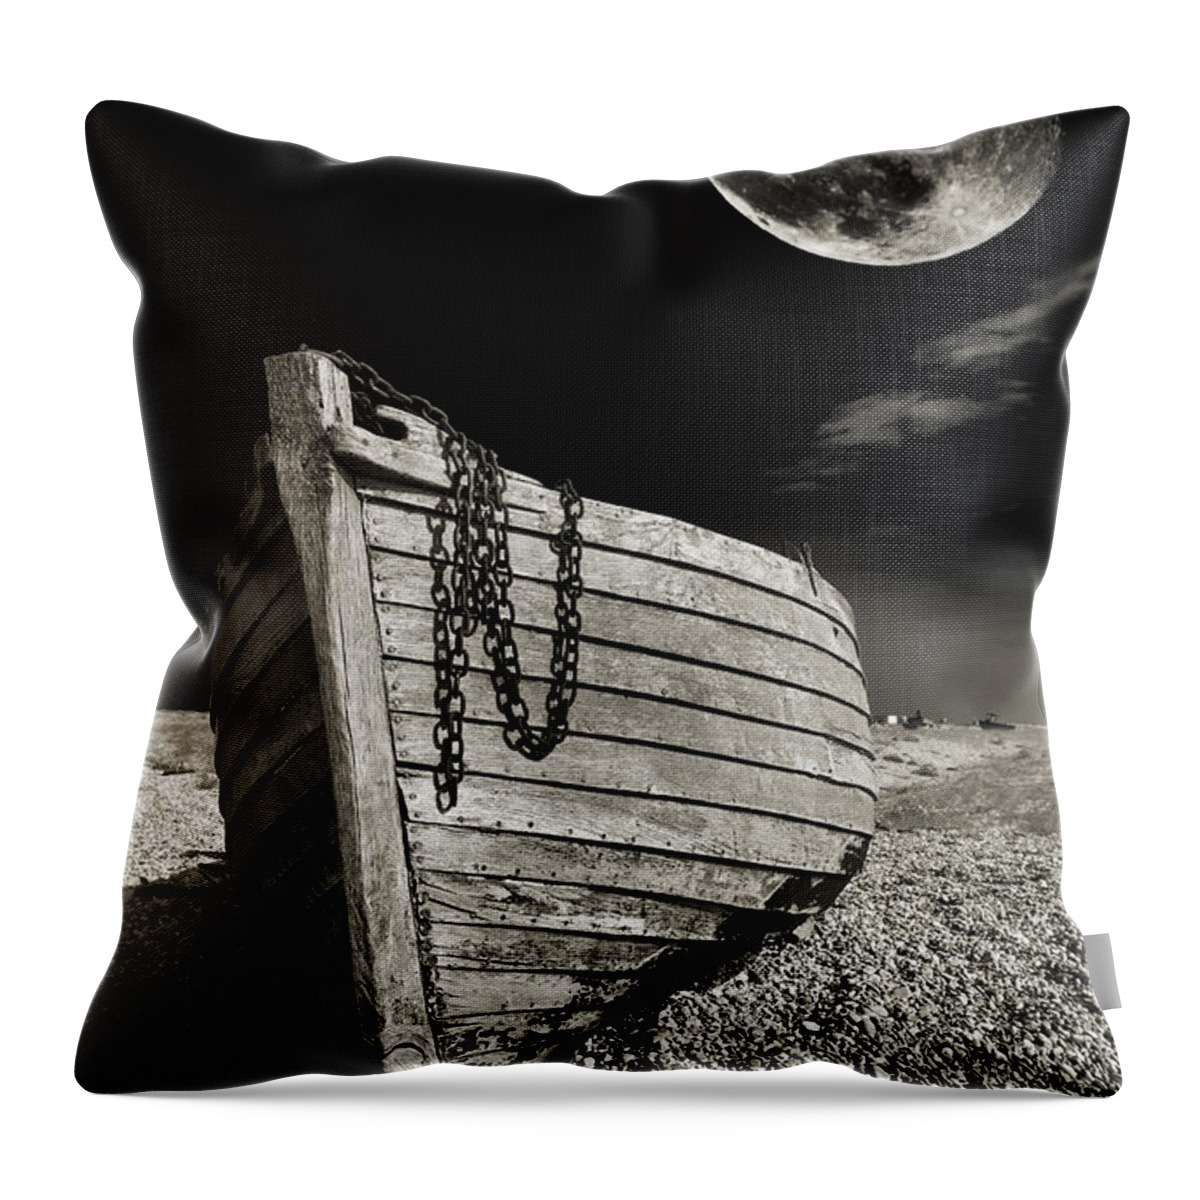 Moody Throw Pillow featuring the photograph Fishing Boat Graveyard 3 by Meirion Matthias